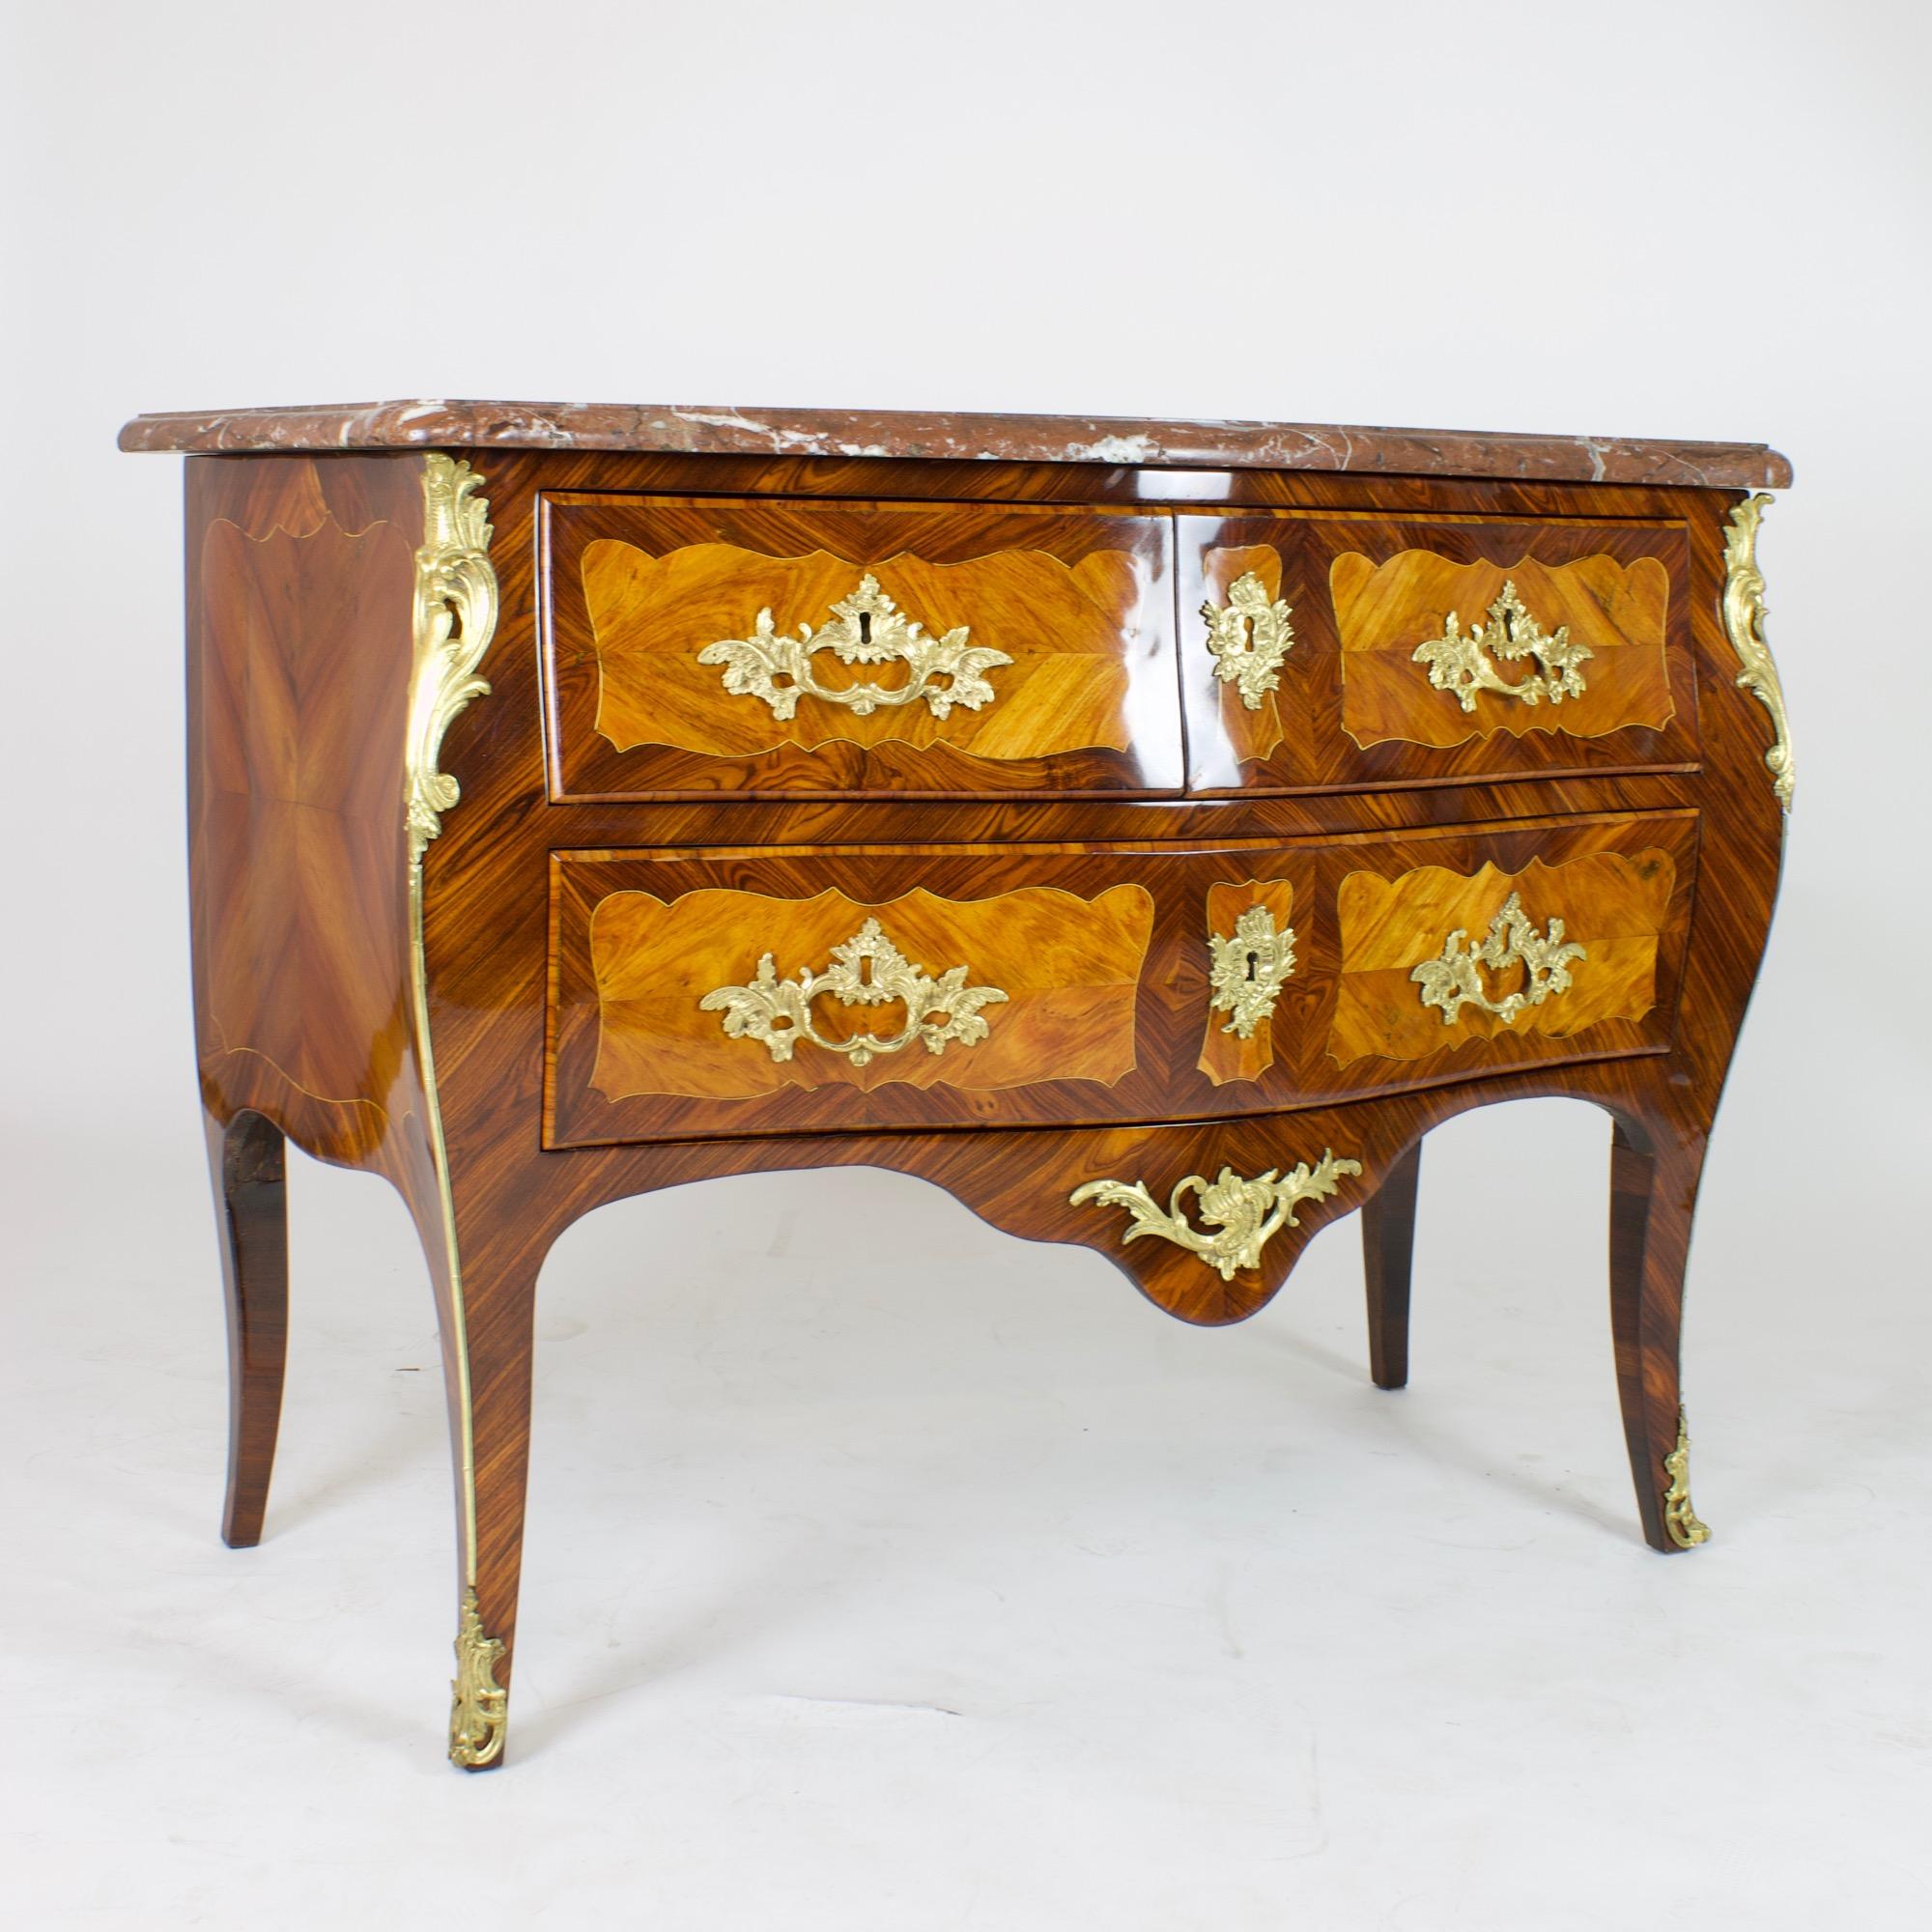 Important 18th century Louis XV Marquetry commode or sauteuse, stamped 